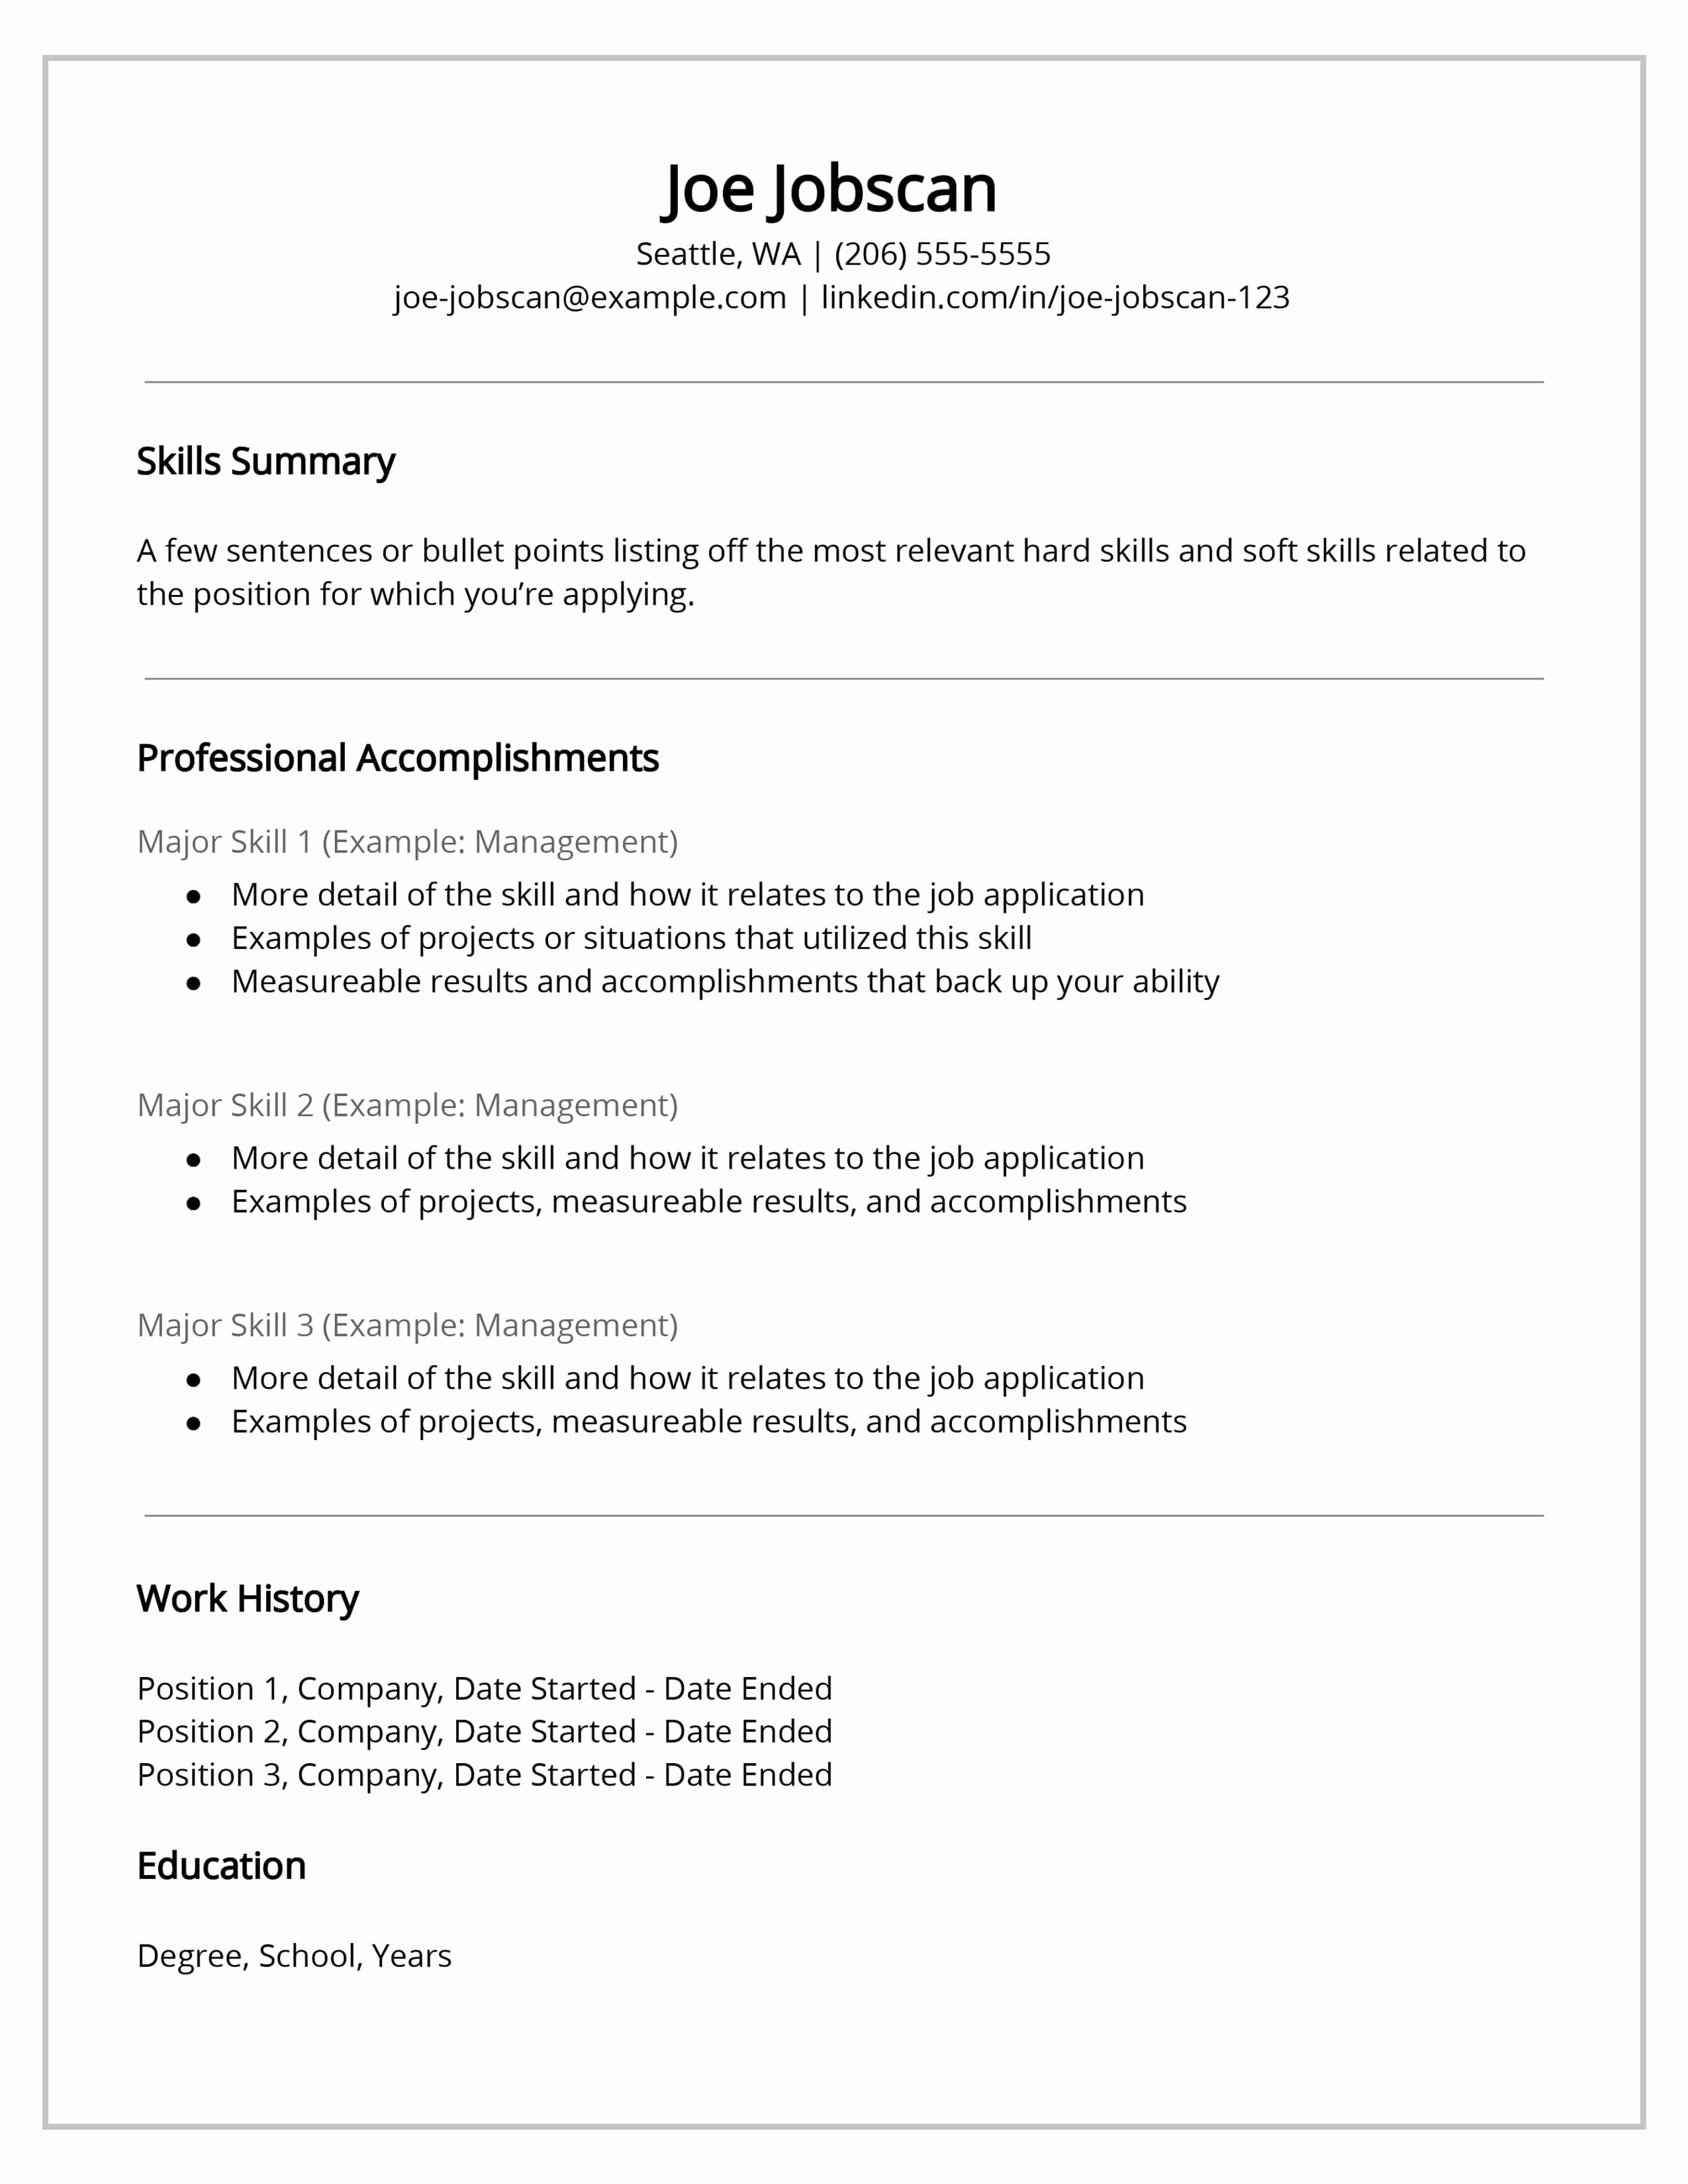 Functional Resume Template Free Lovely why Recruiters Hate the Functional Resume format Jobscan